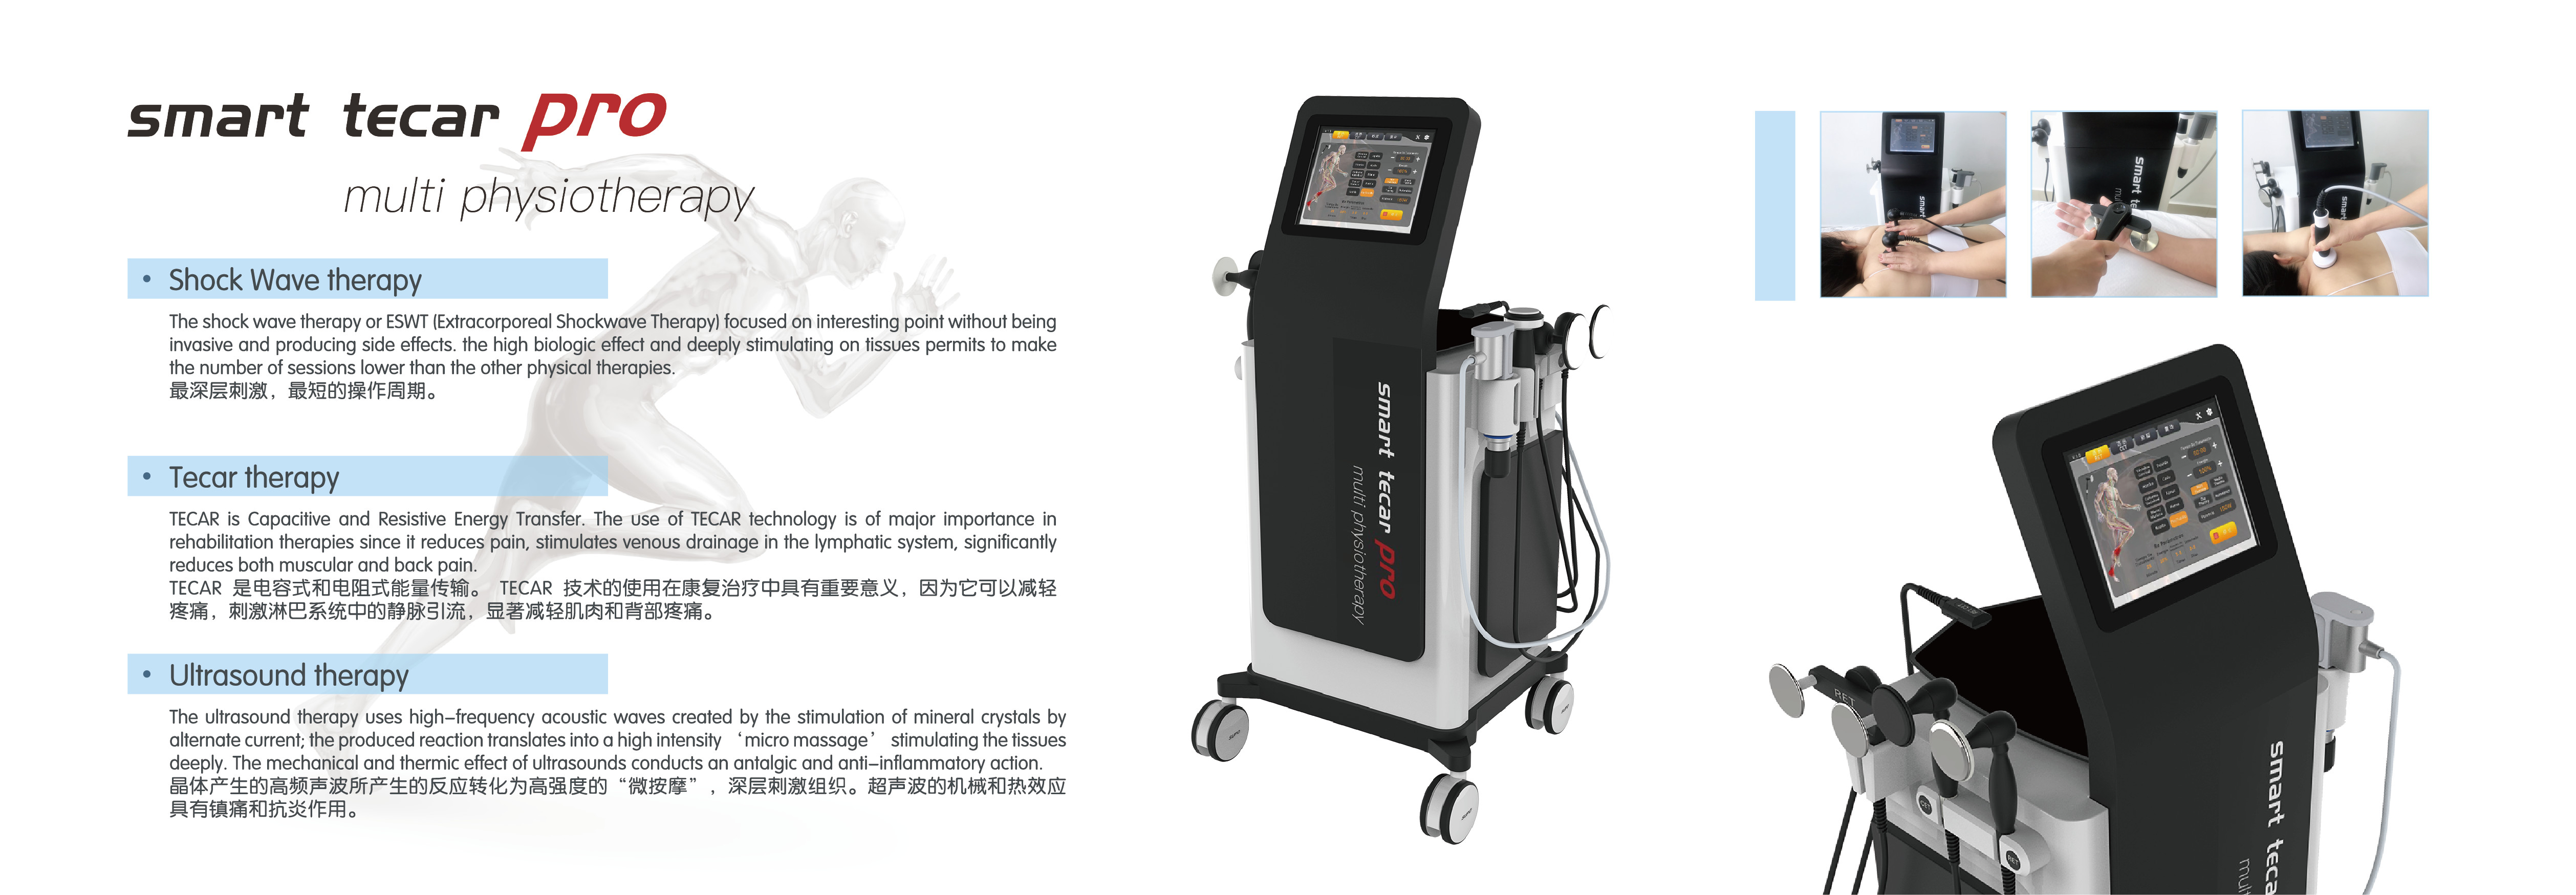 Air Pressure Therapy Machine Tecar Therapy Microwave Diathermy Equipment For Body Muscle Relax